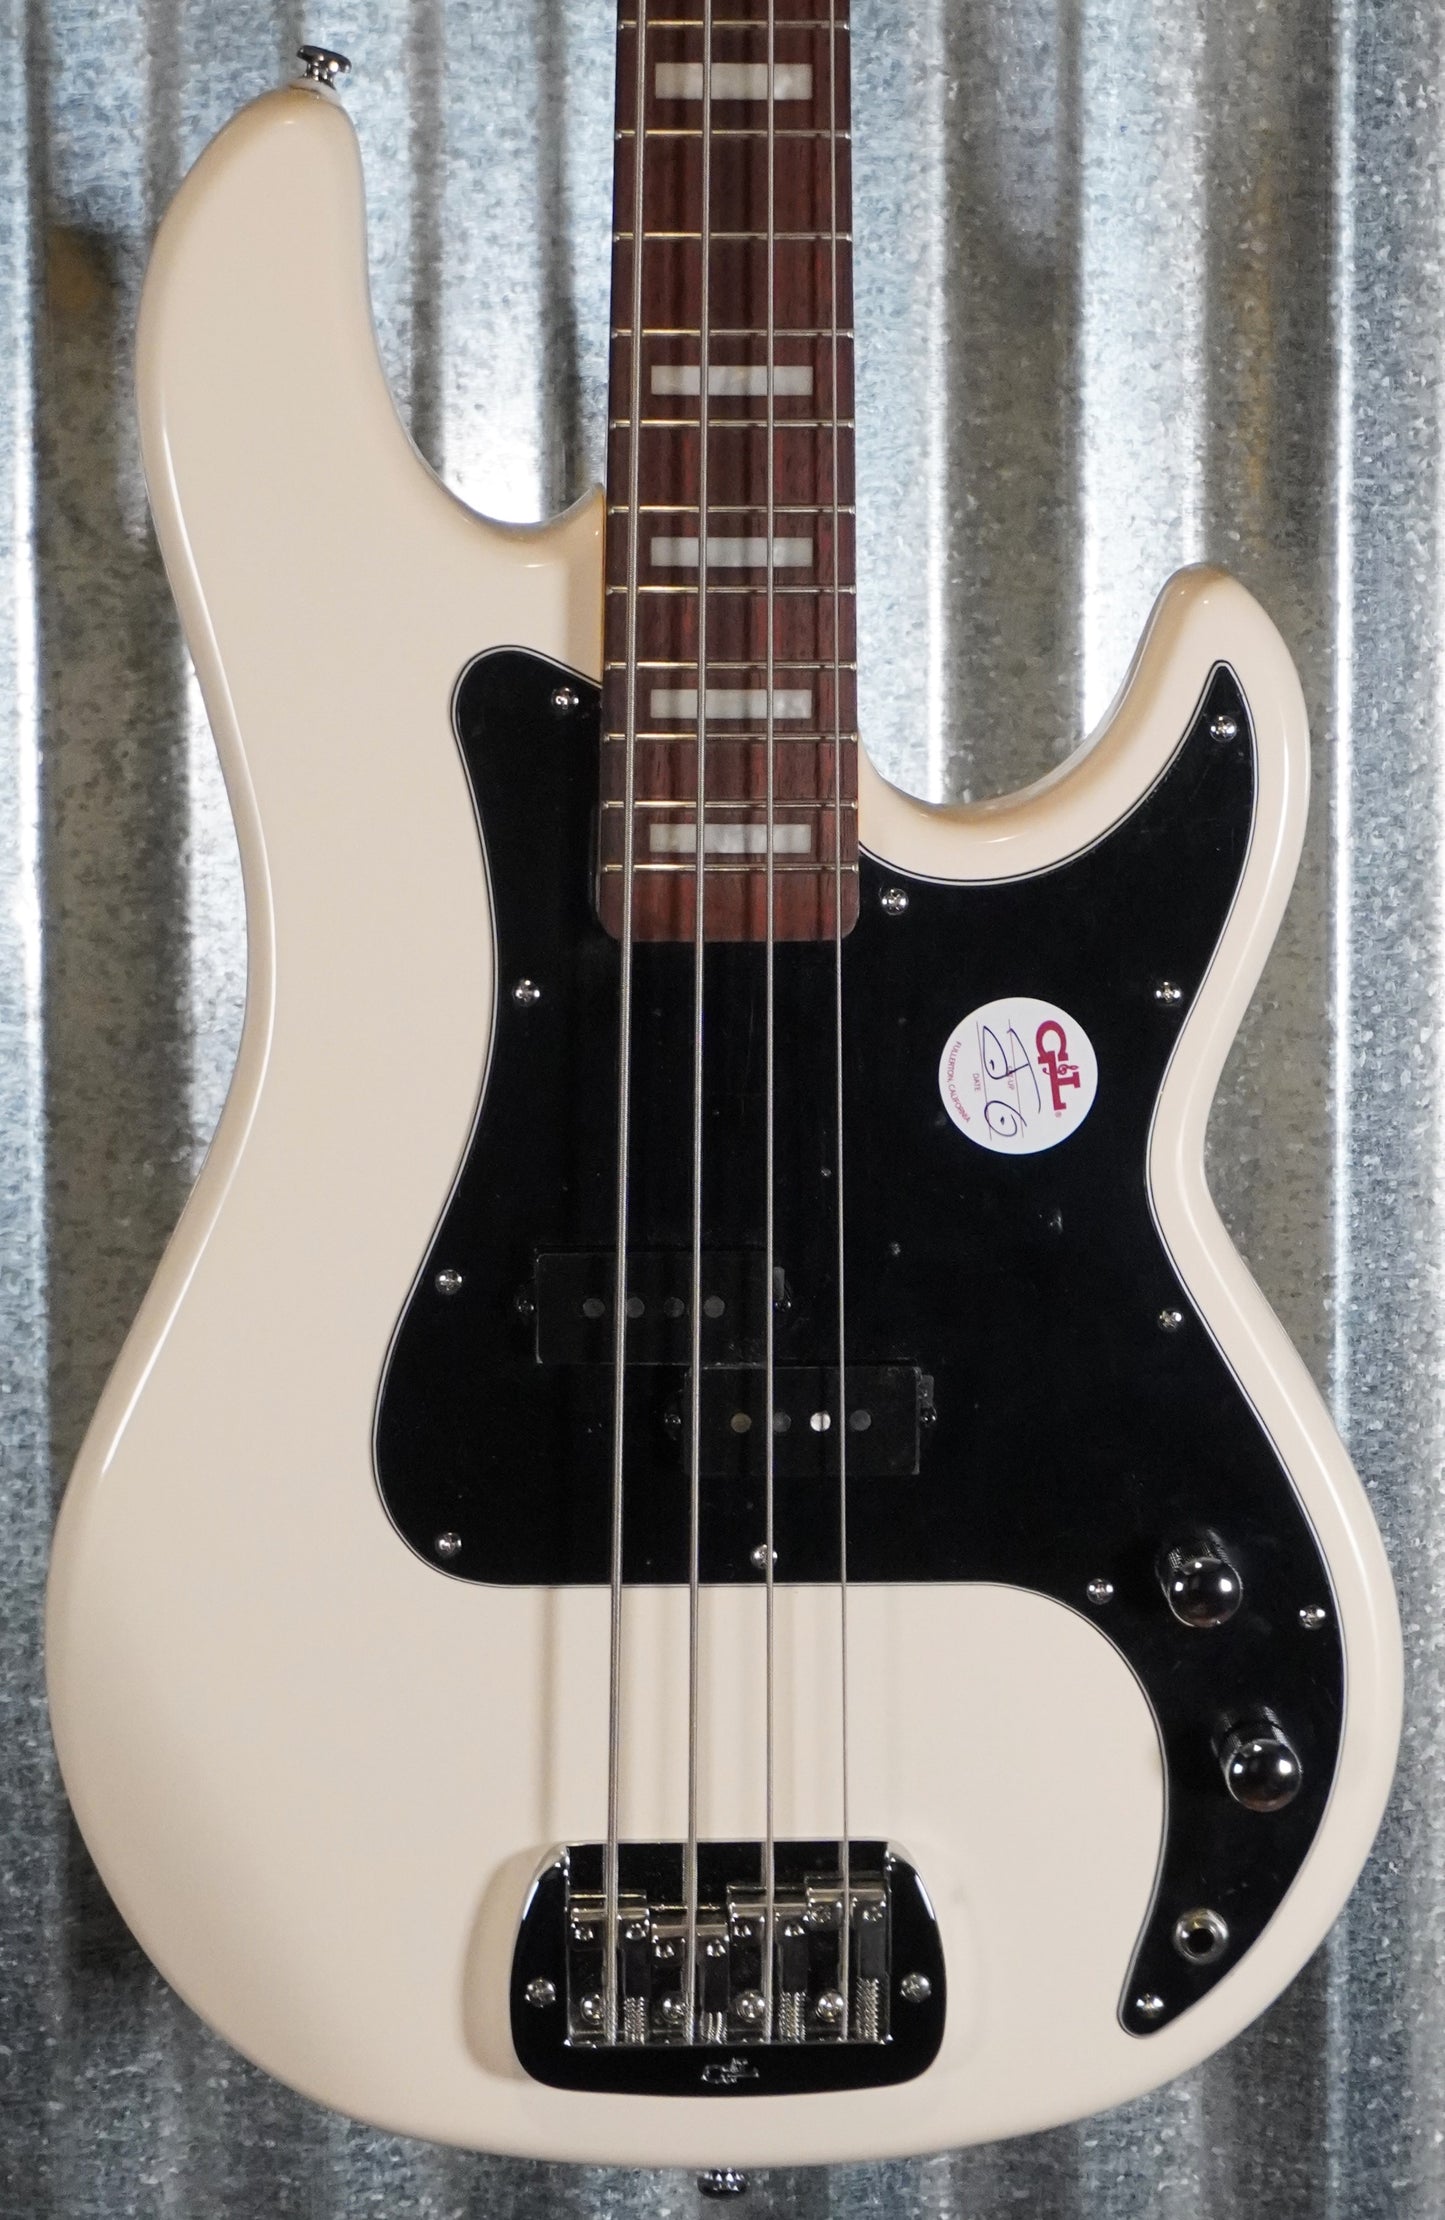 G&L Tribute LB-100 Olympic White 4 String Bass #1712 Used